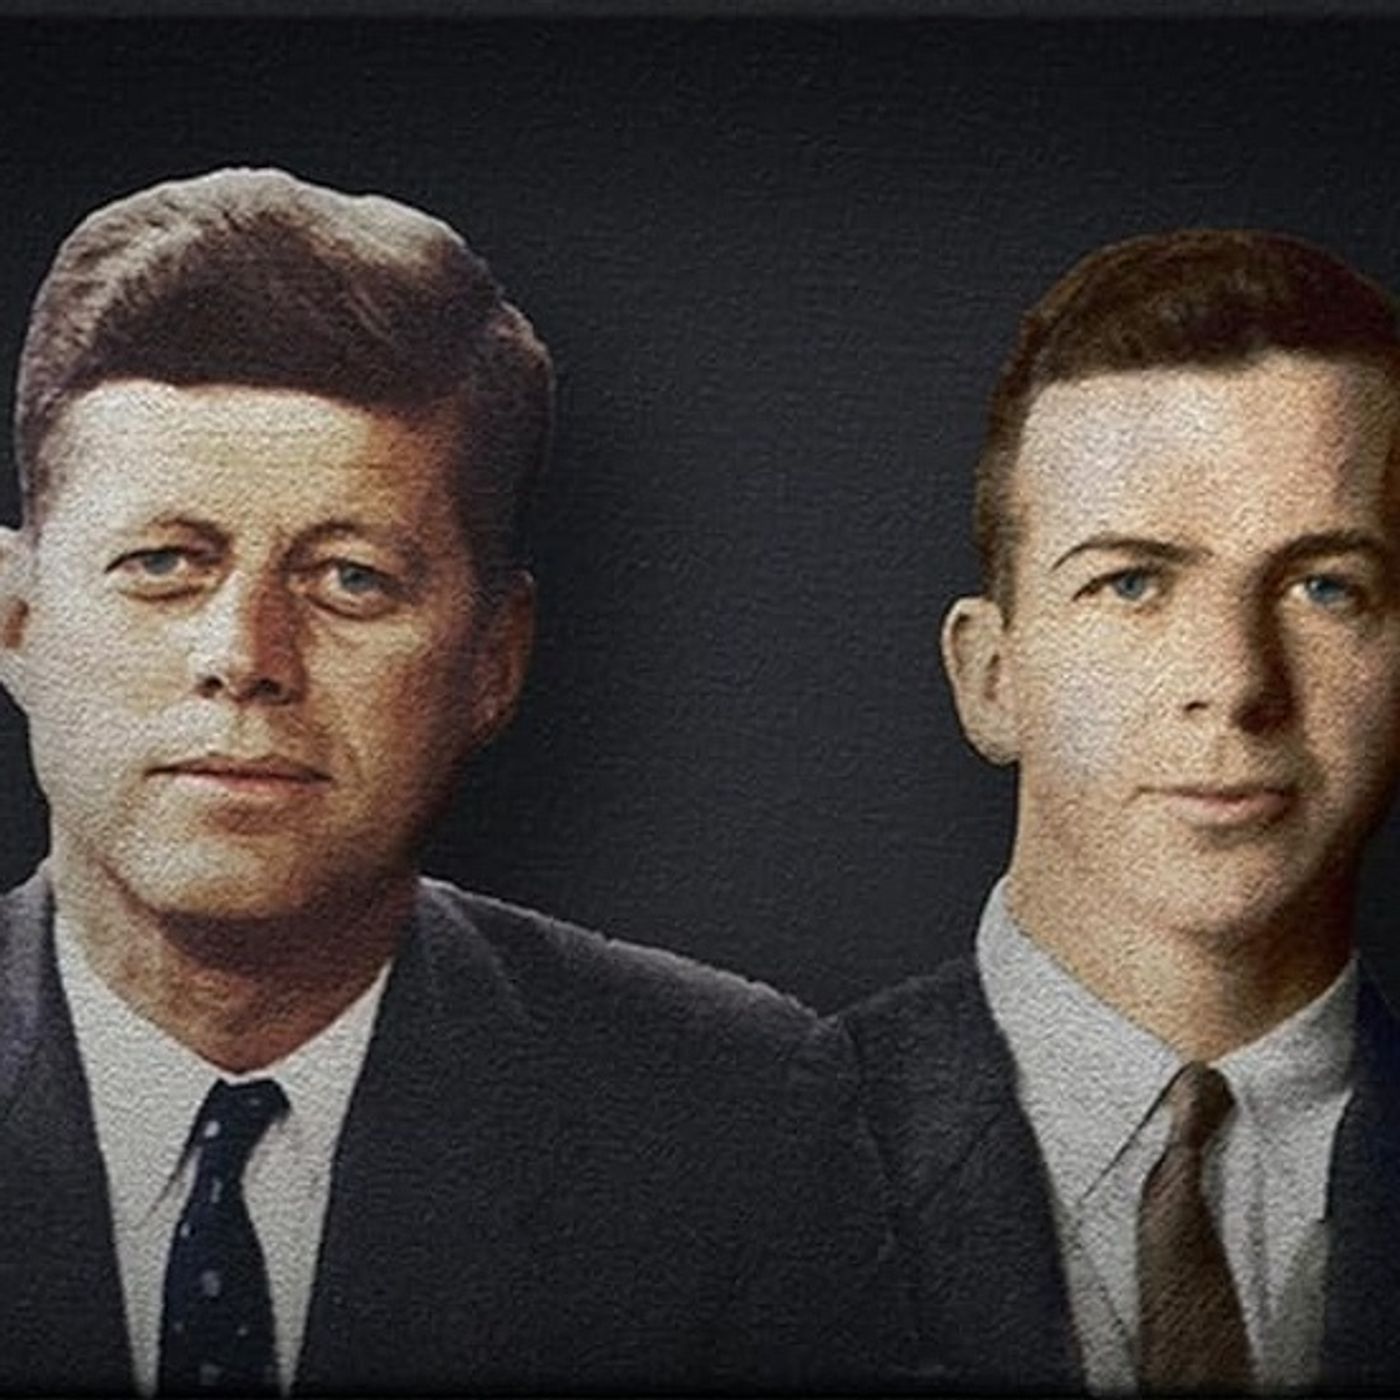 Rob McConnell Interviews - DR. GEORGE SCHWIMMER - Oswald & Kennedy, The Whole Story